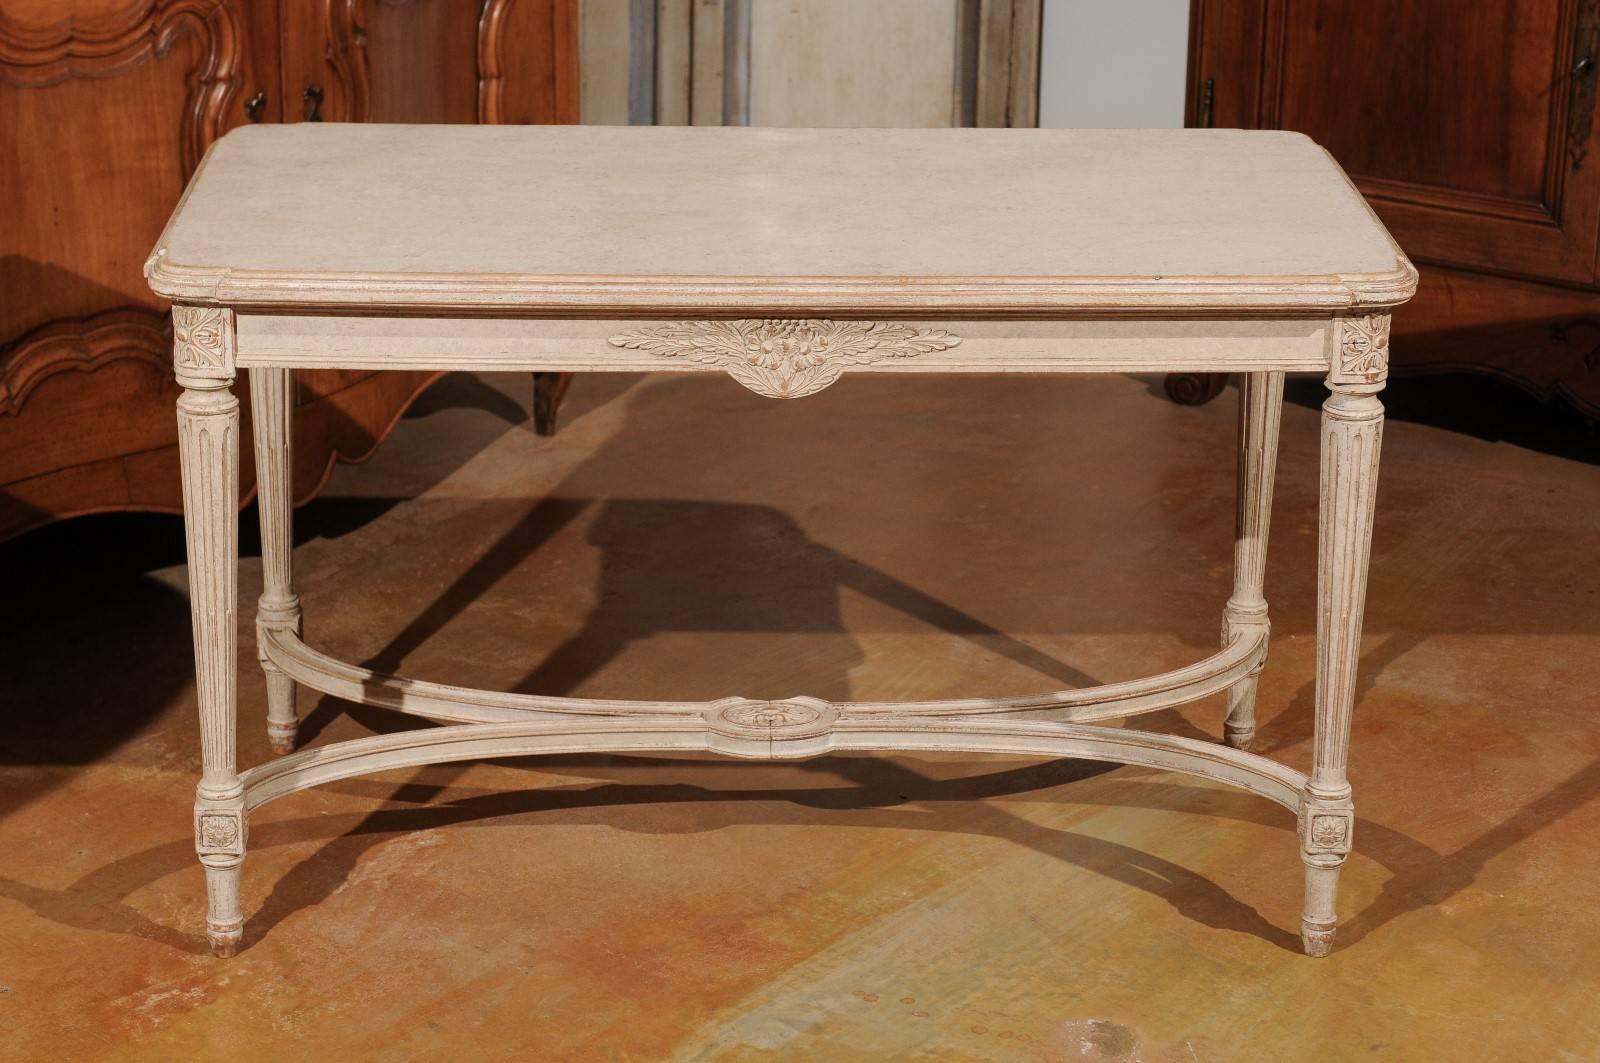 20th Century Swedish Gustavian Style Painted Wood Tea Table with Fluted Legs, circa 1920 For Sale